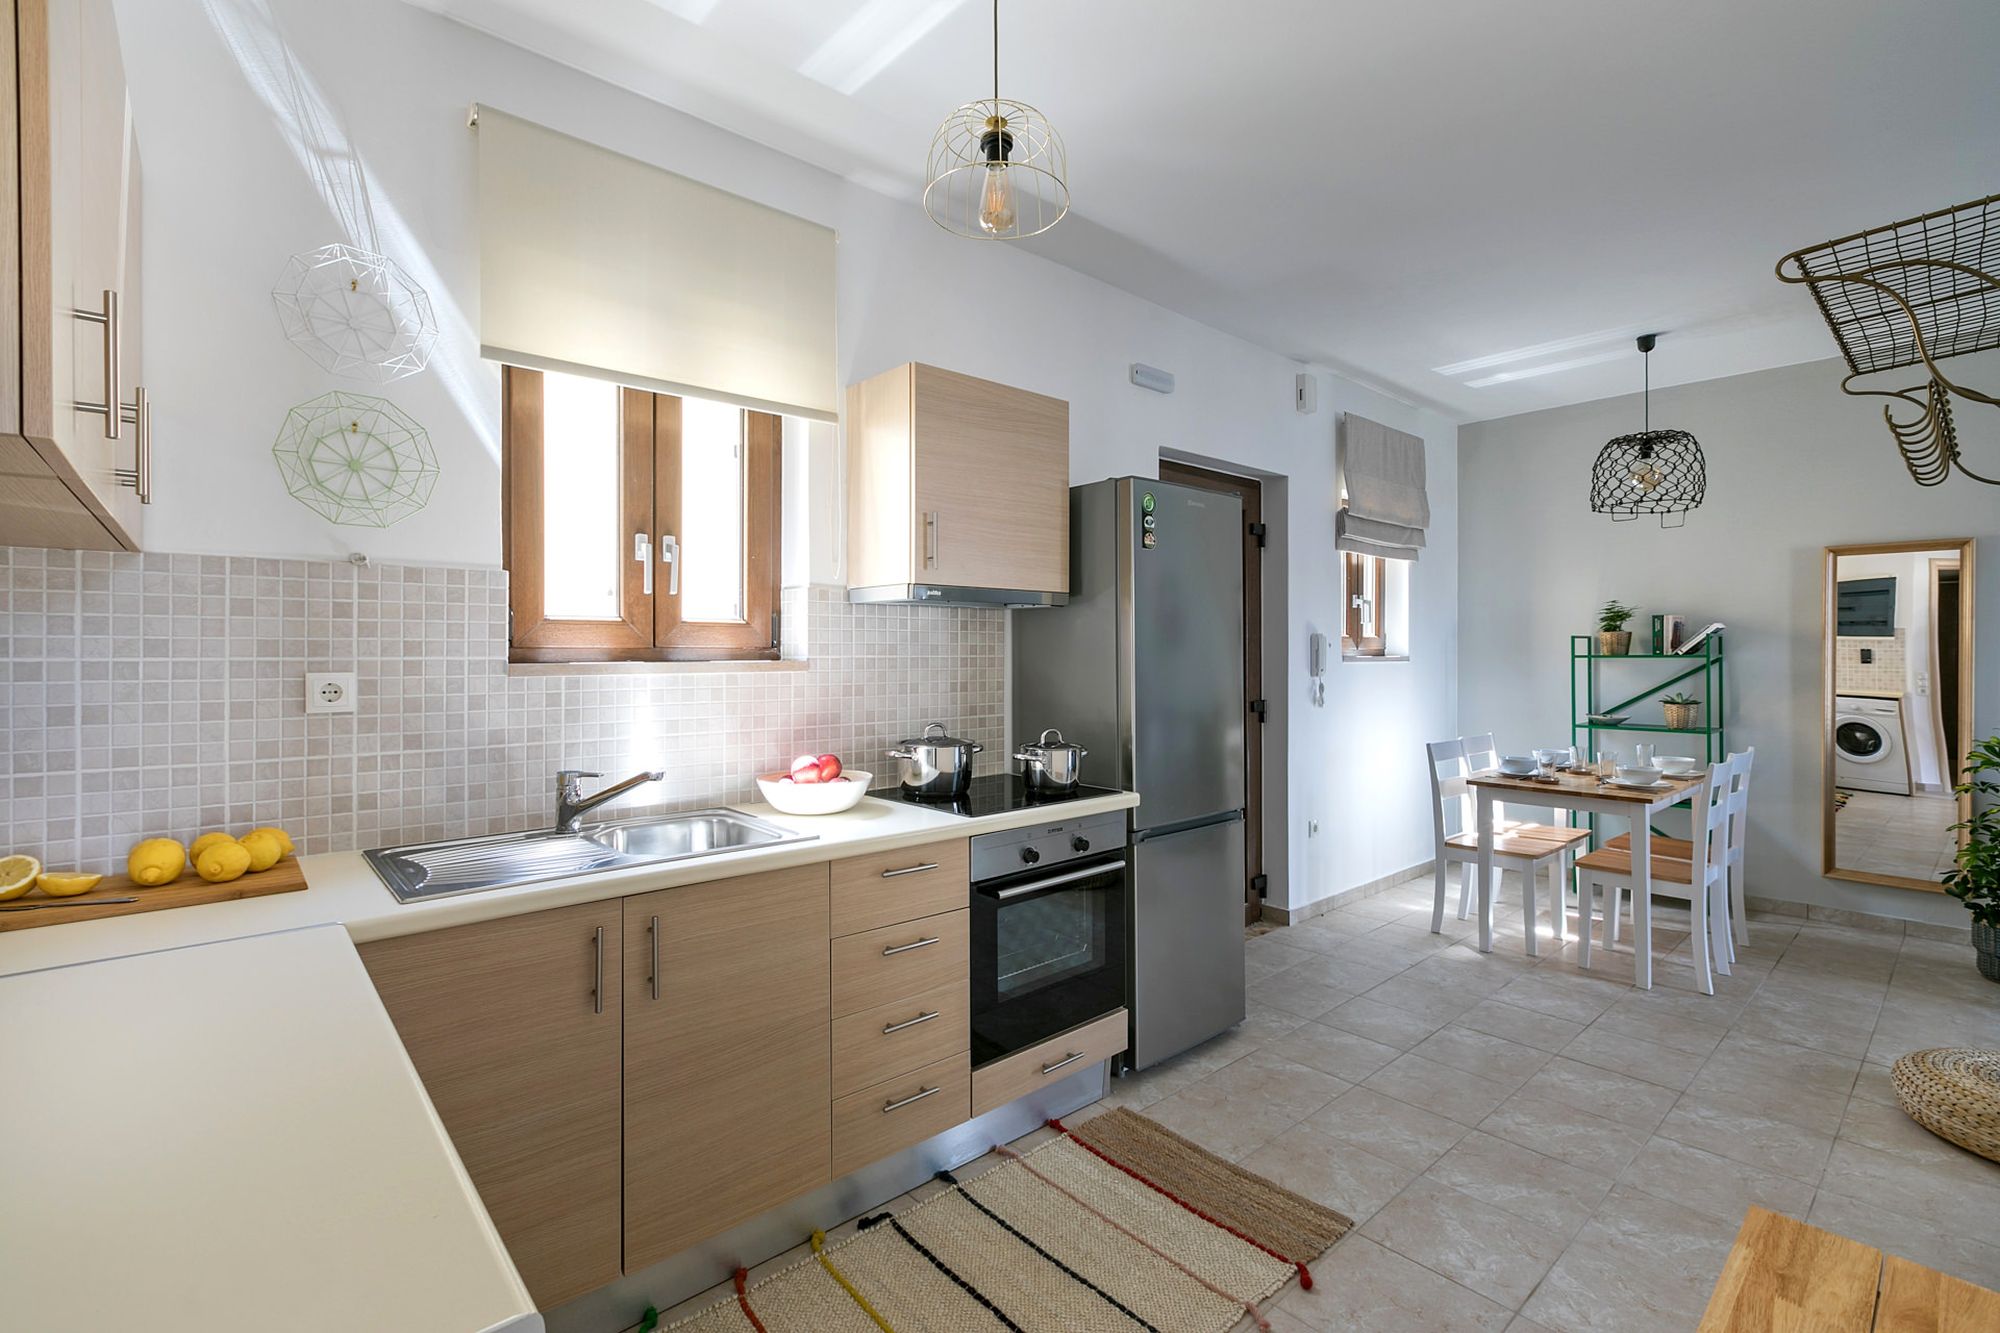 Modern and fully equipped kitchen with a big inox fridge, an electric cooker oven and a dining table in same space.